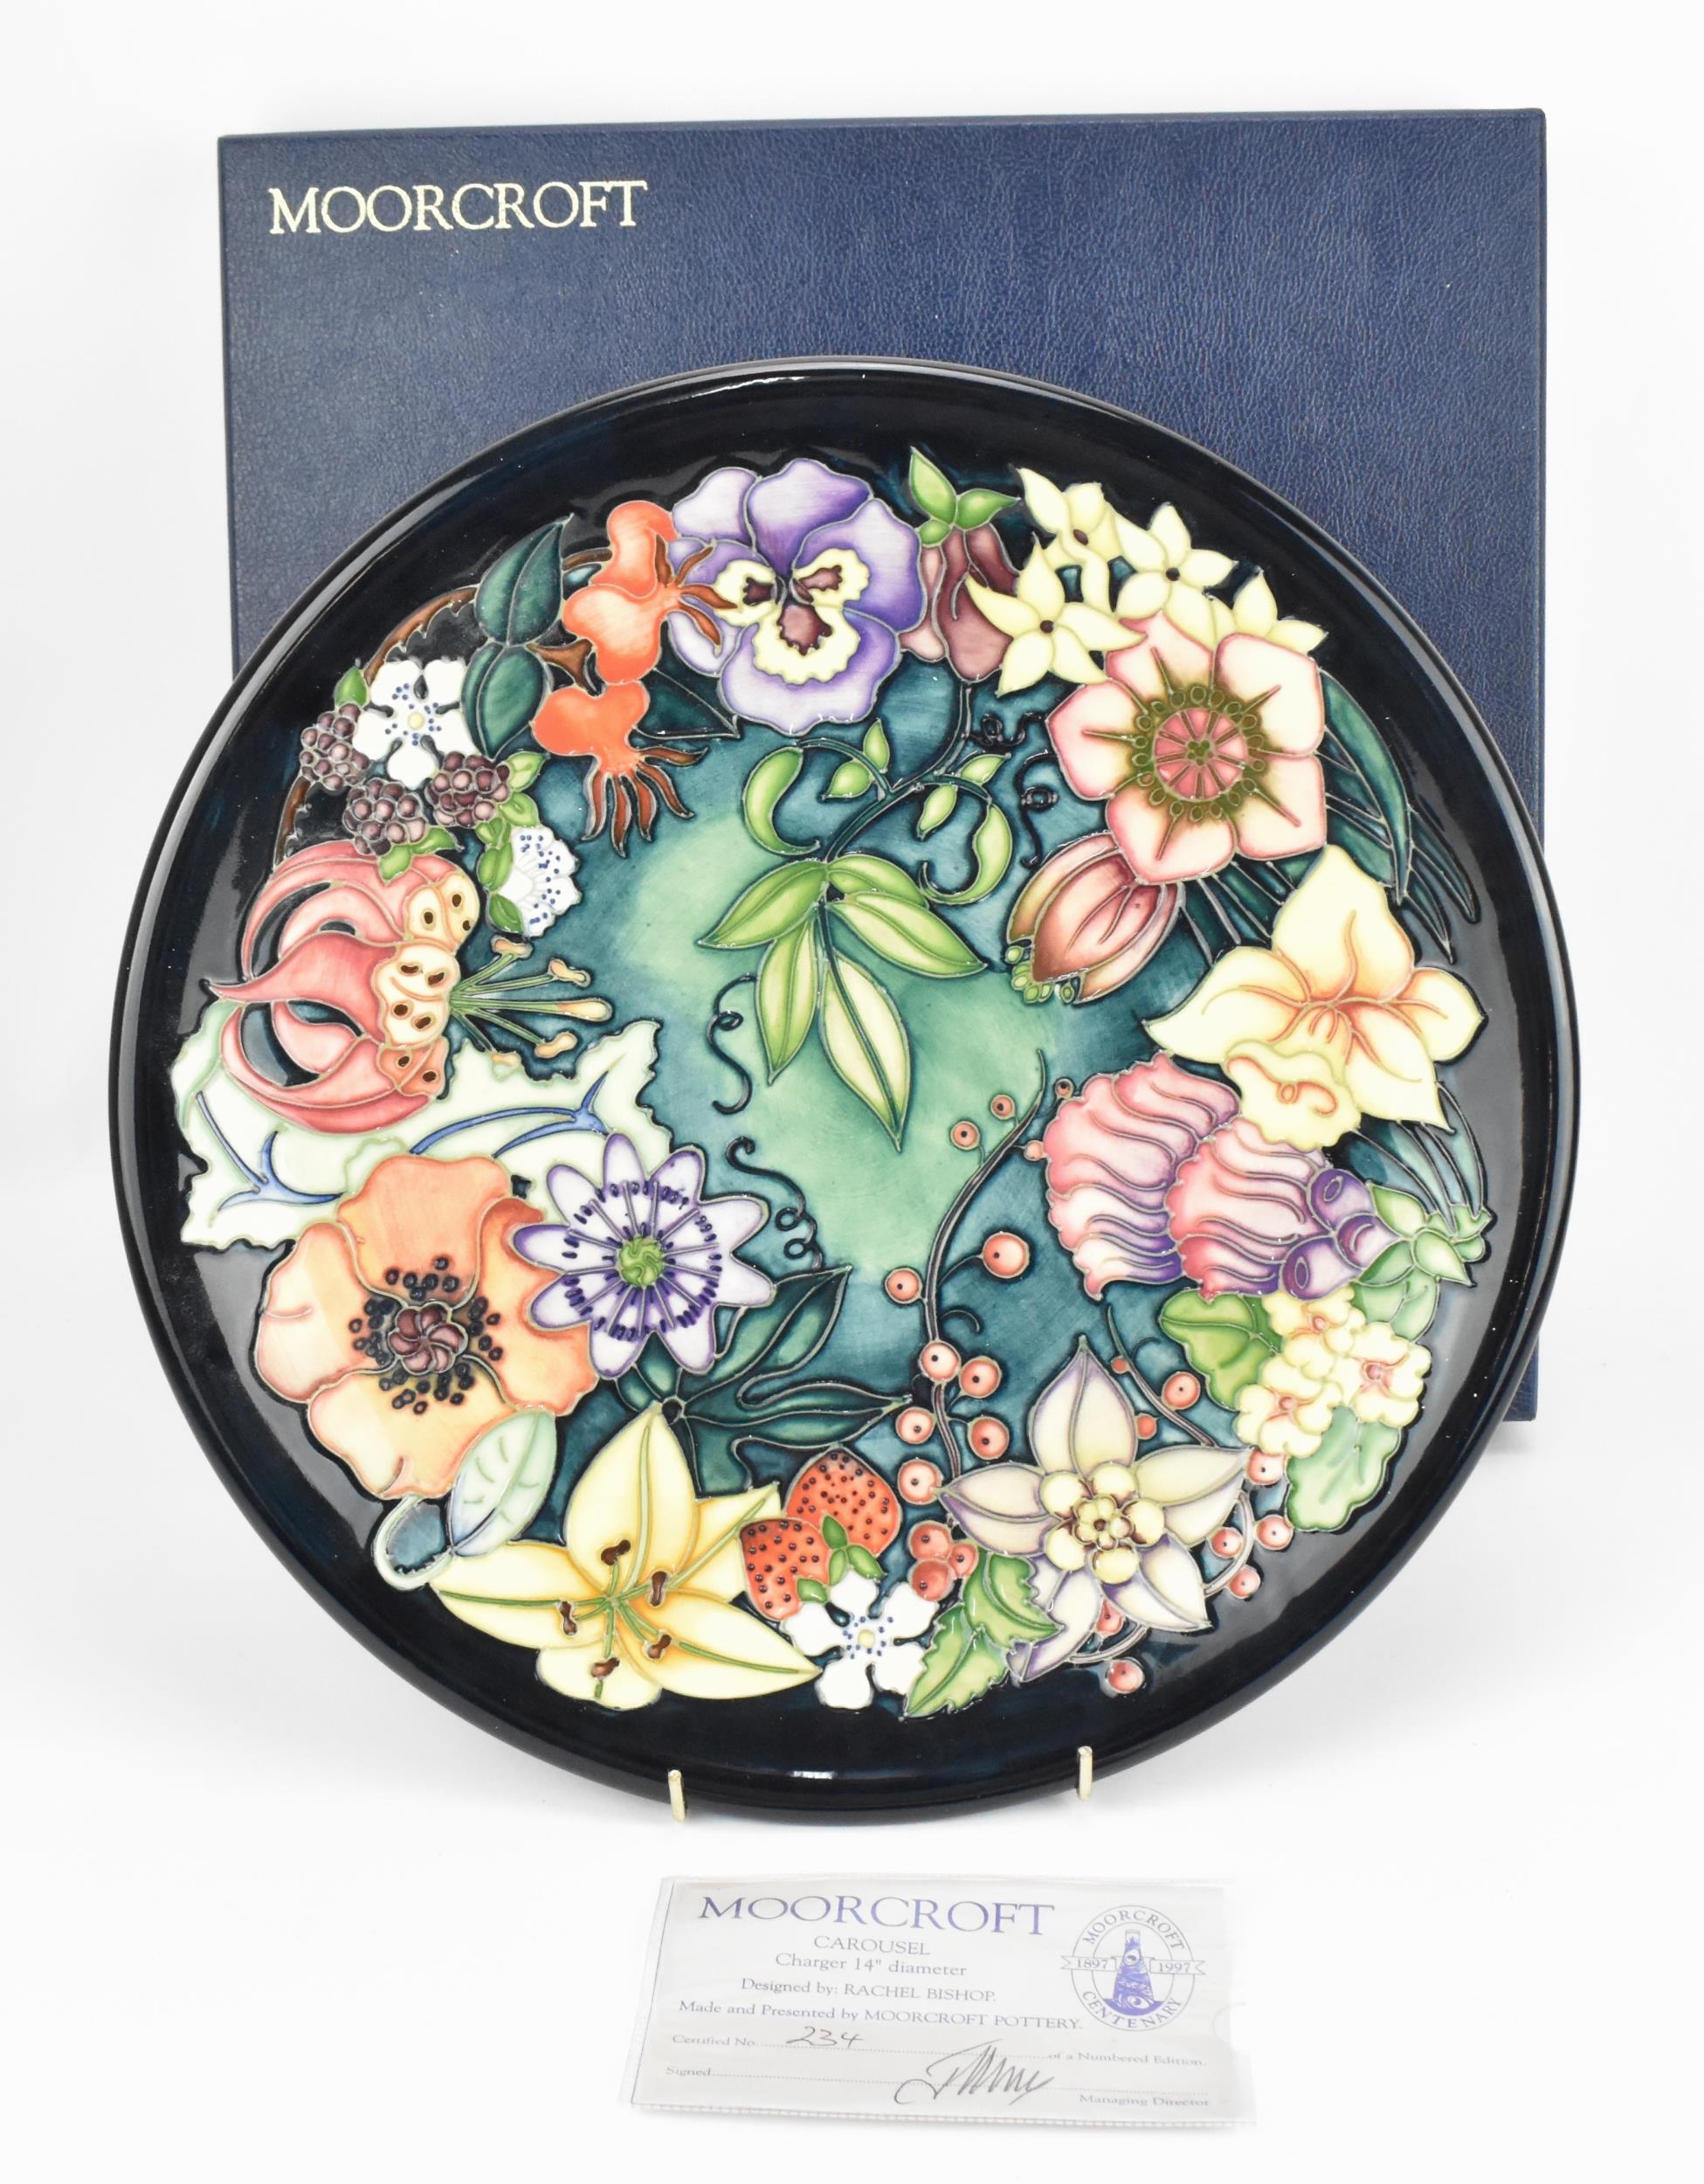 A Moorcroft pottery 'Carousel' charger designed by Rachel Bishop, painted by Sharon Austin, 1996,